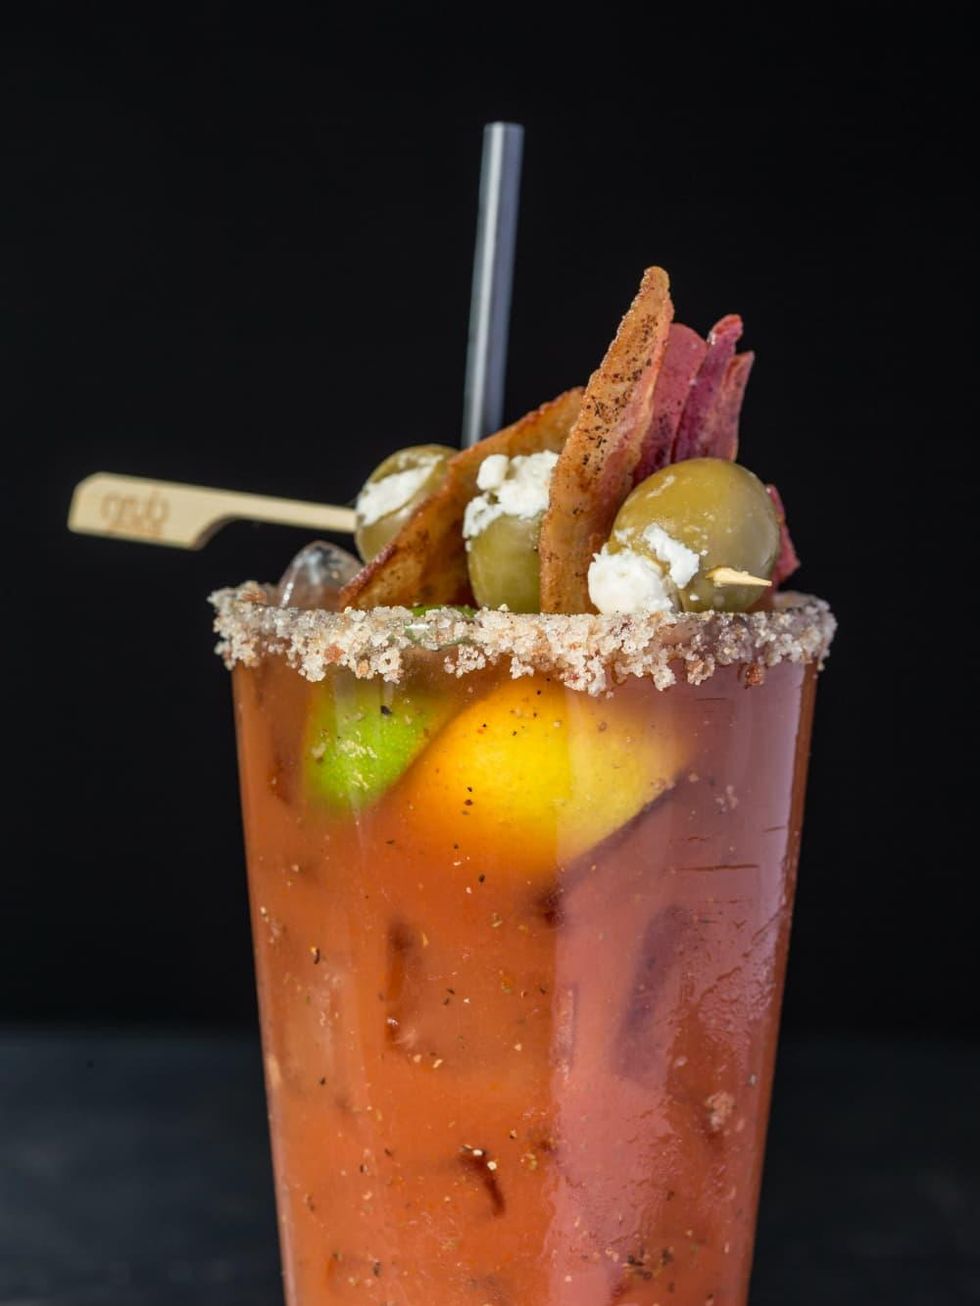 Bacon-infused Bloody Mary